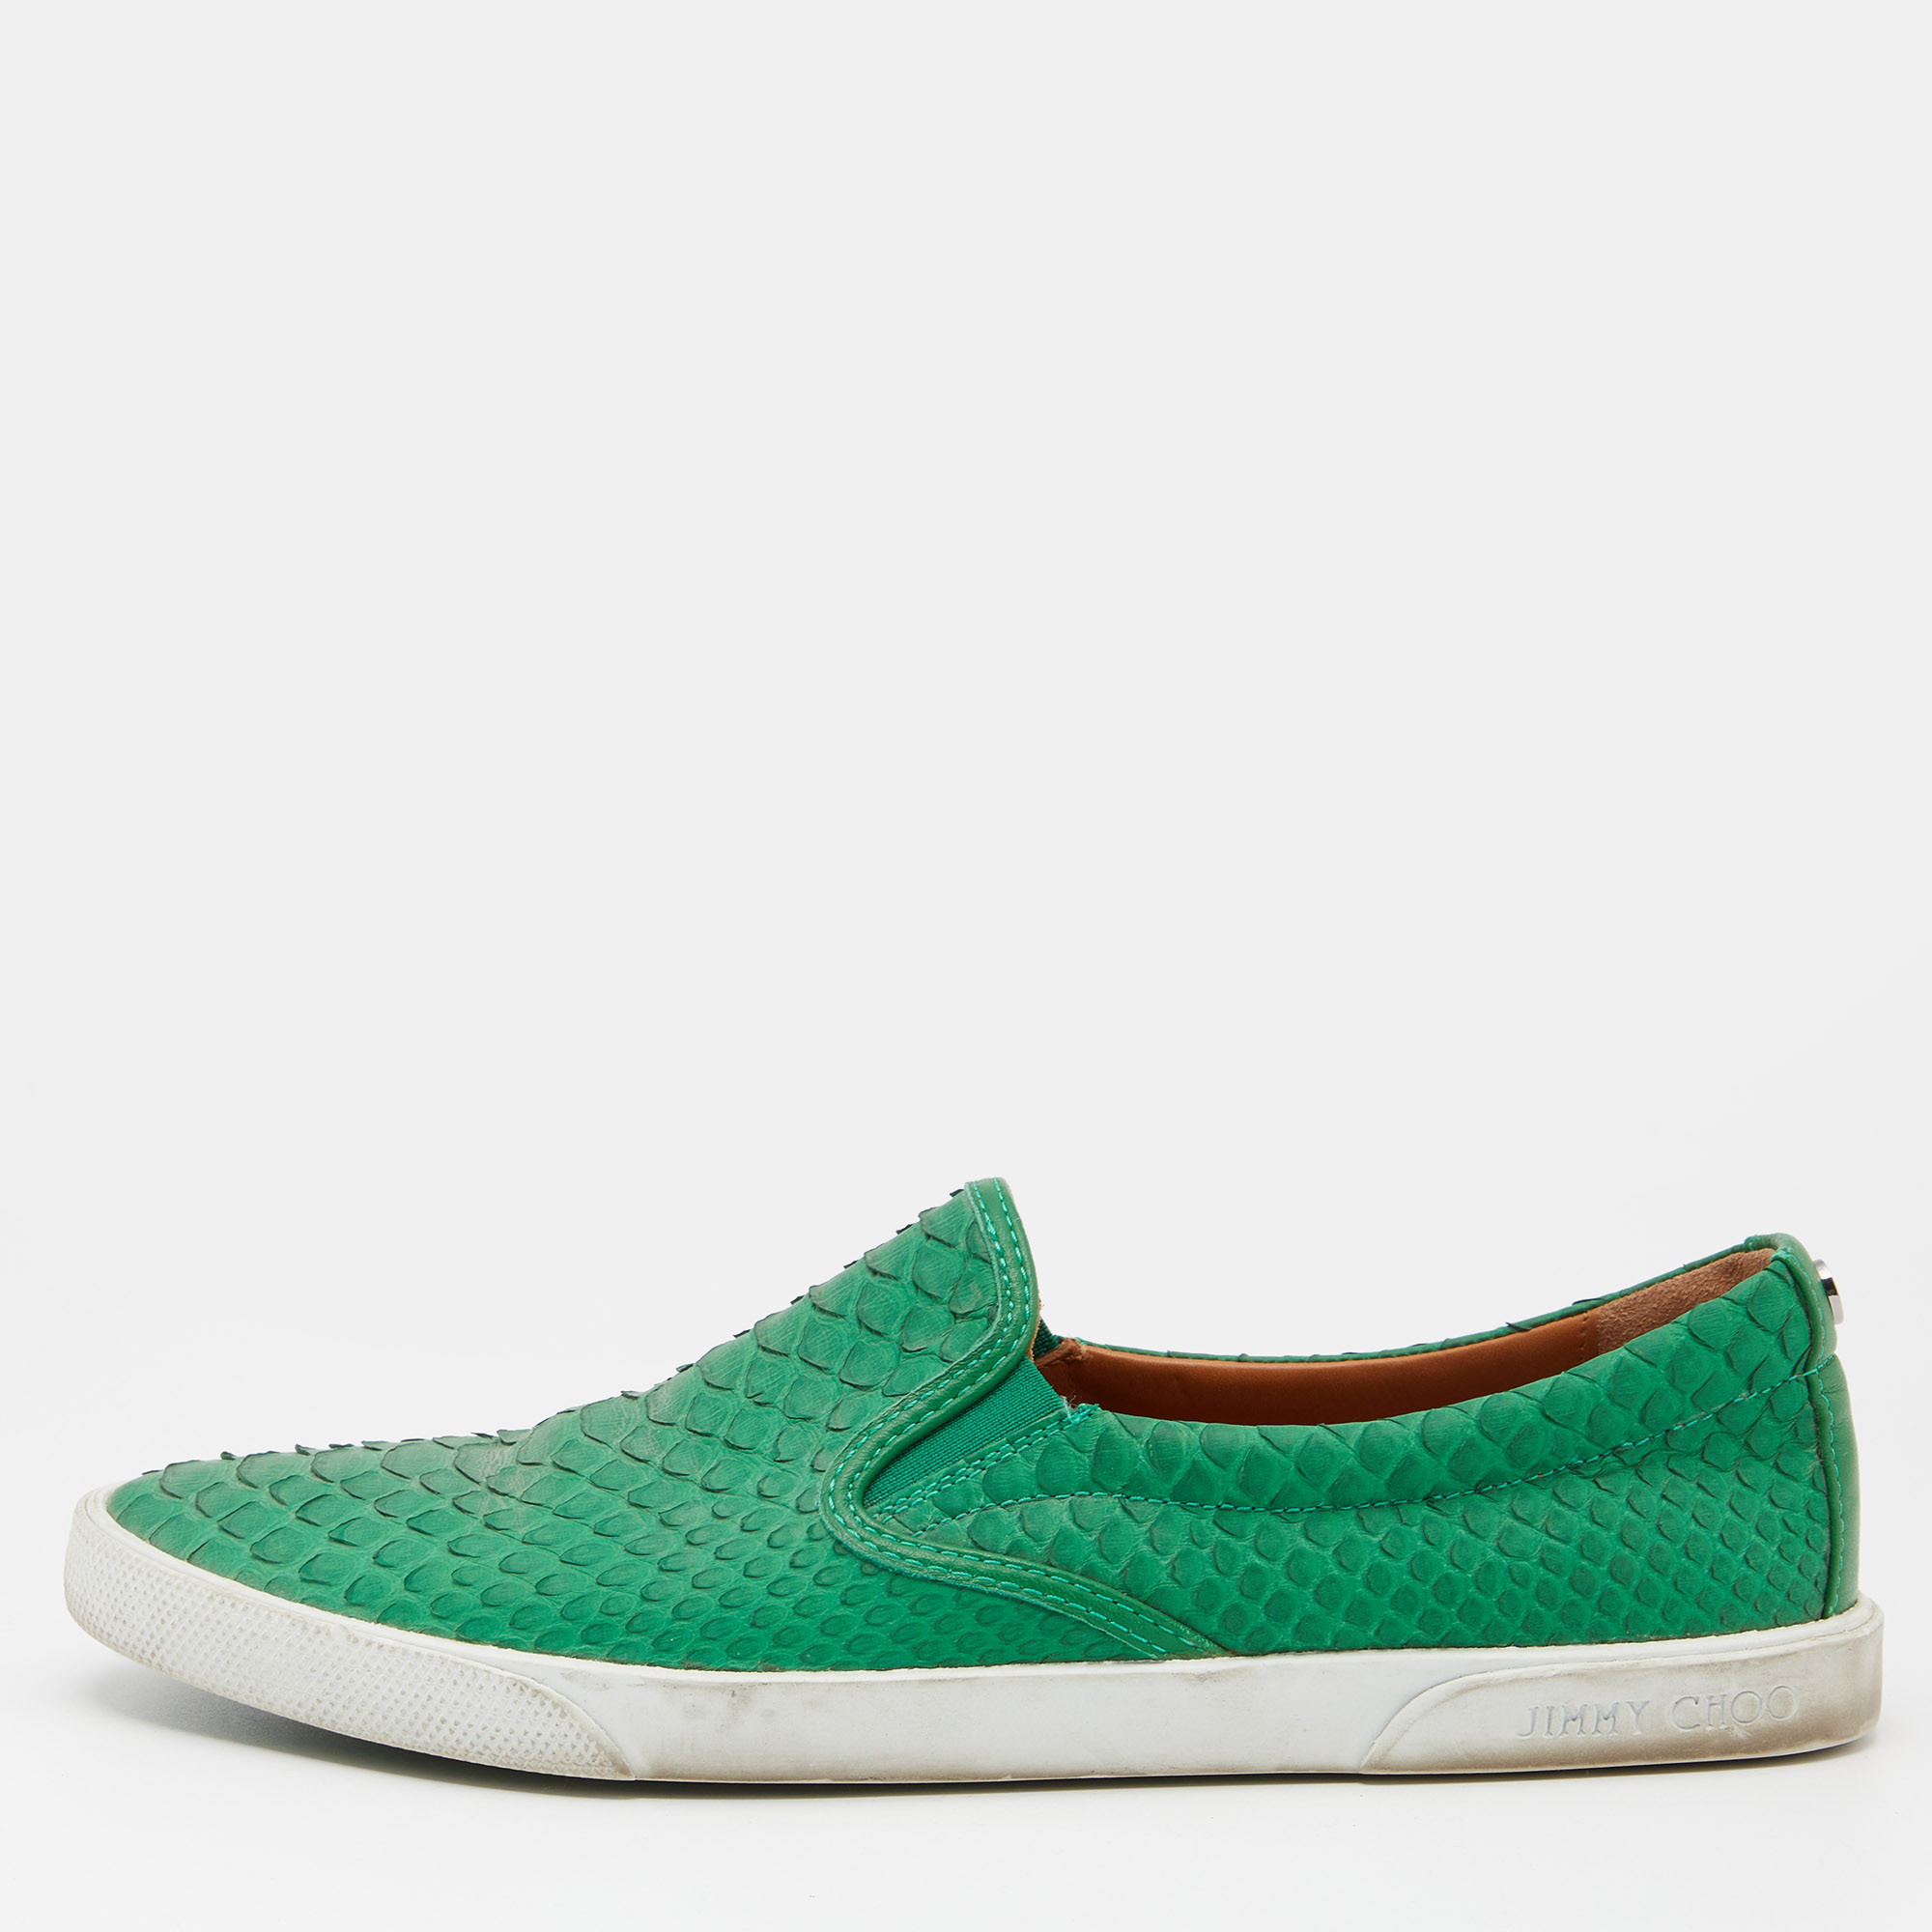 Pre-owned Jimmy Choo Green Python Slip On Sneakers Size 38.5